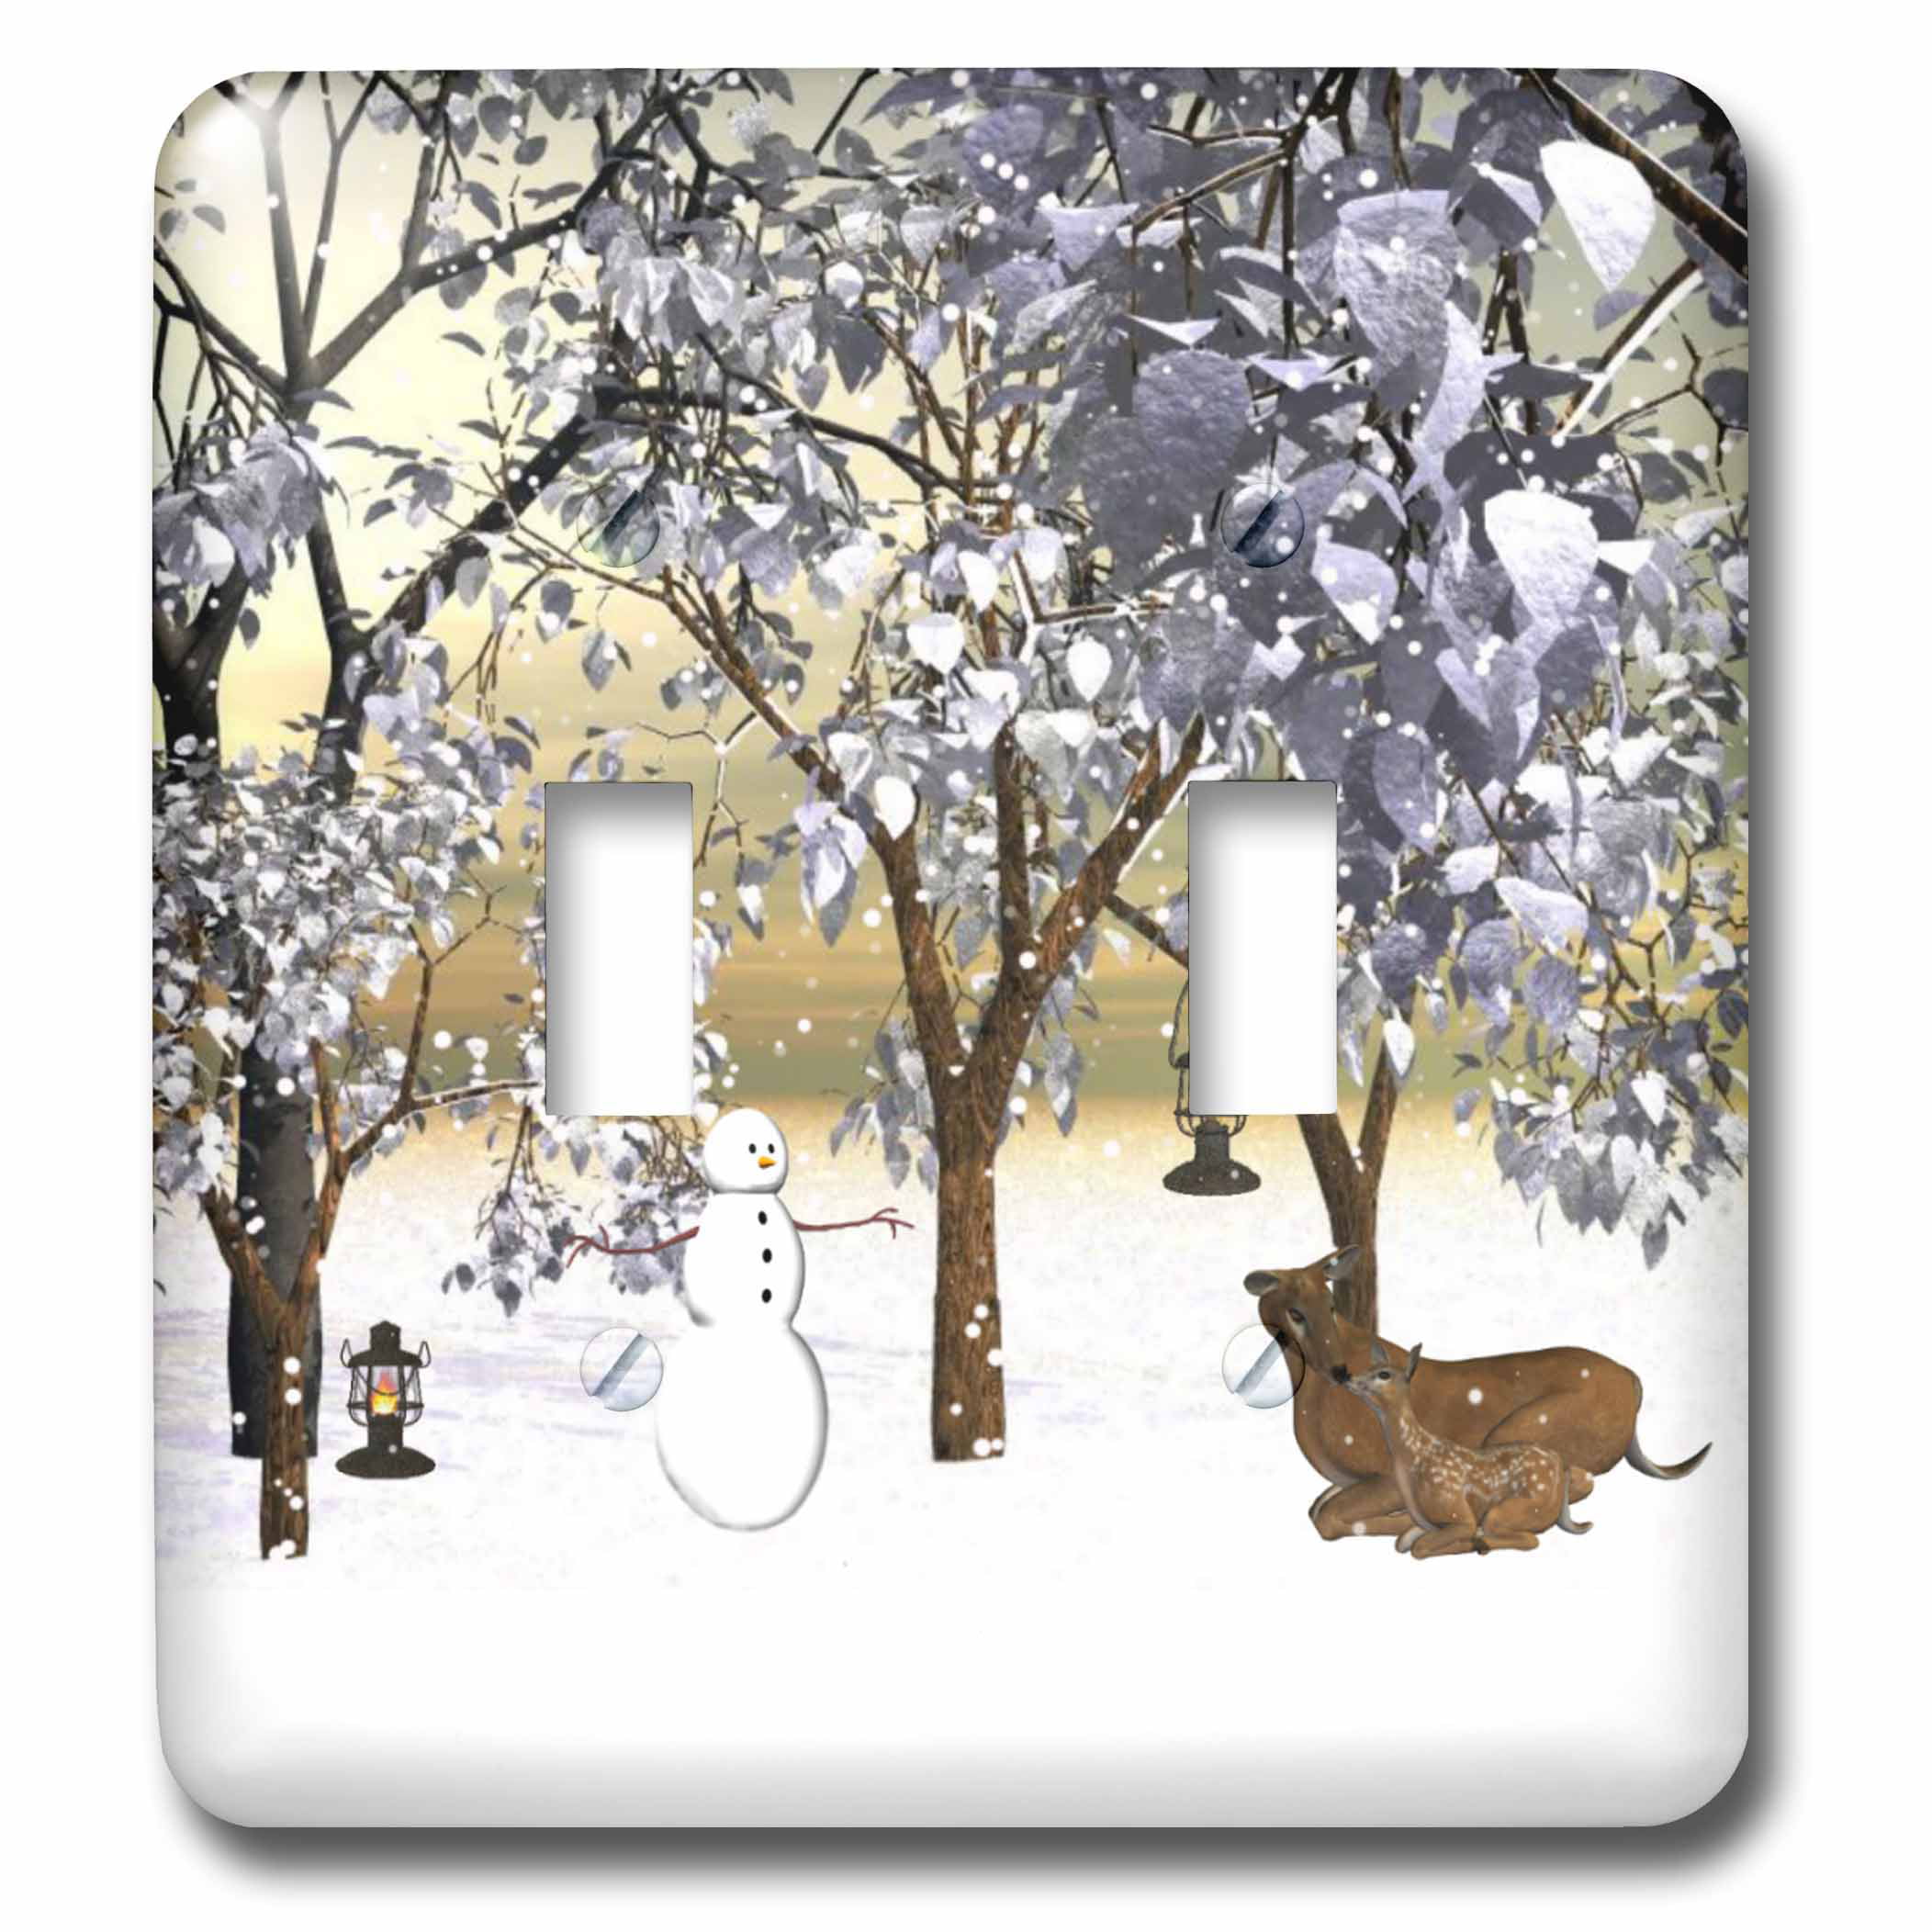 Multicolor 3dRose lsp_97866_2 Snowman and Deer Family in Winter Wonderland Double Toggle Switch